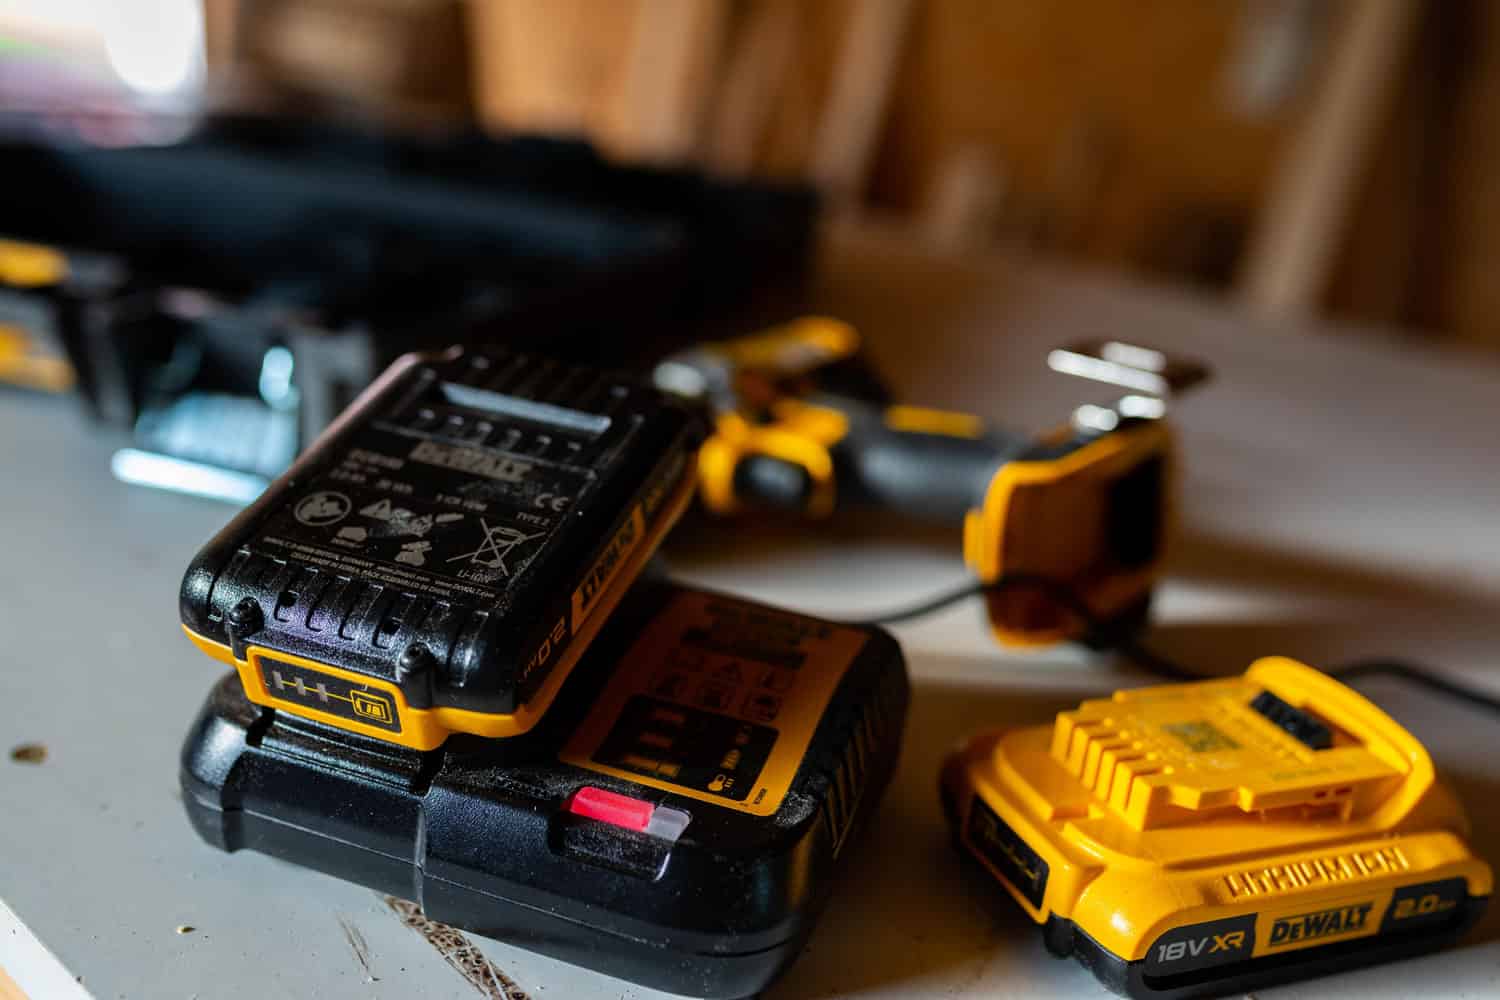 A charger and two DeWalt batteries